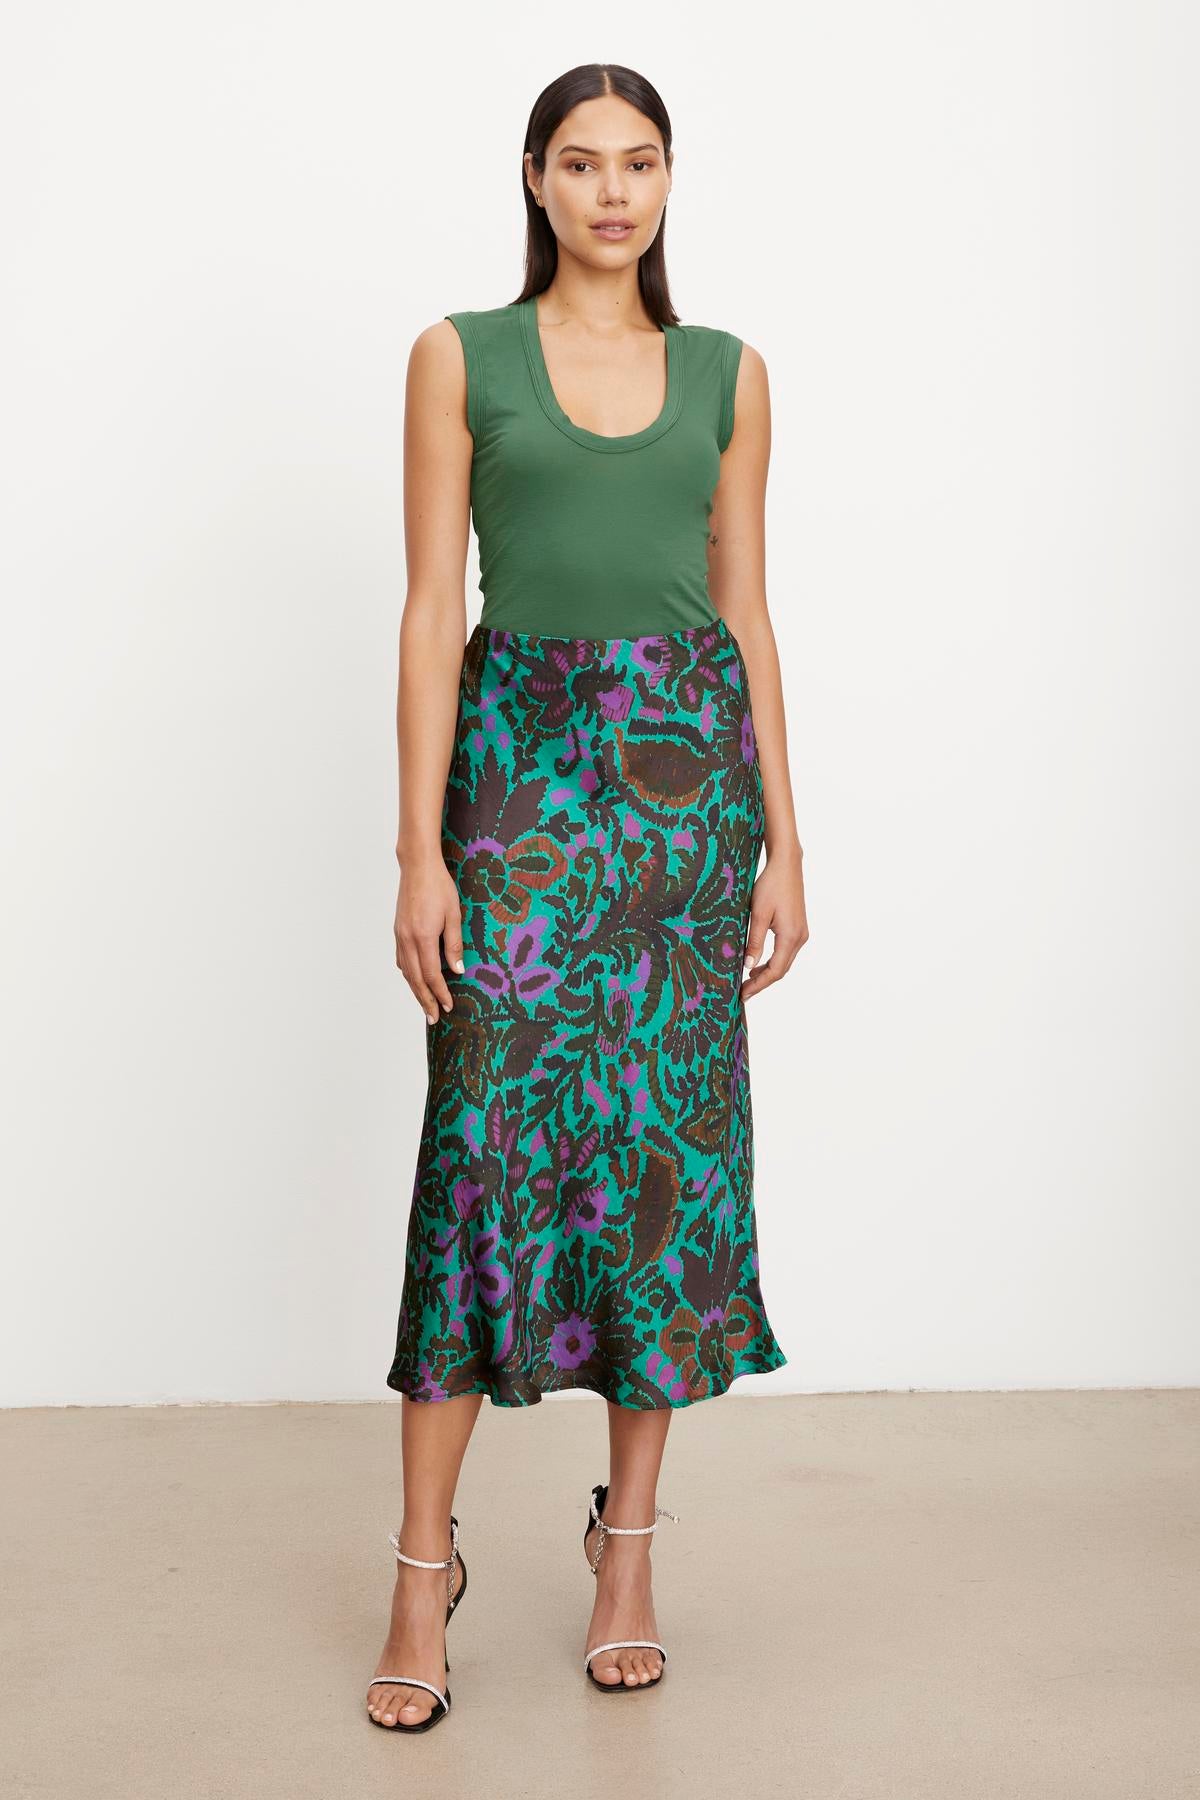 The model is wearing a green top and a KAIYA PRINTED SKIRT by Velvet by Graham & Spencer with an elastic waist for a comfortable fit.-36094331060417